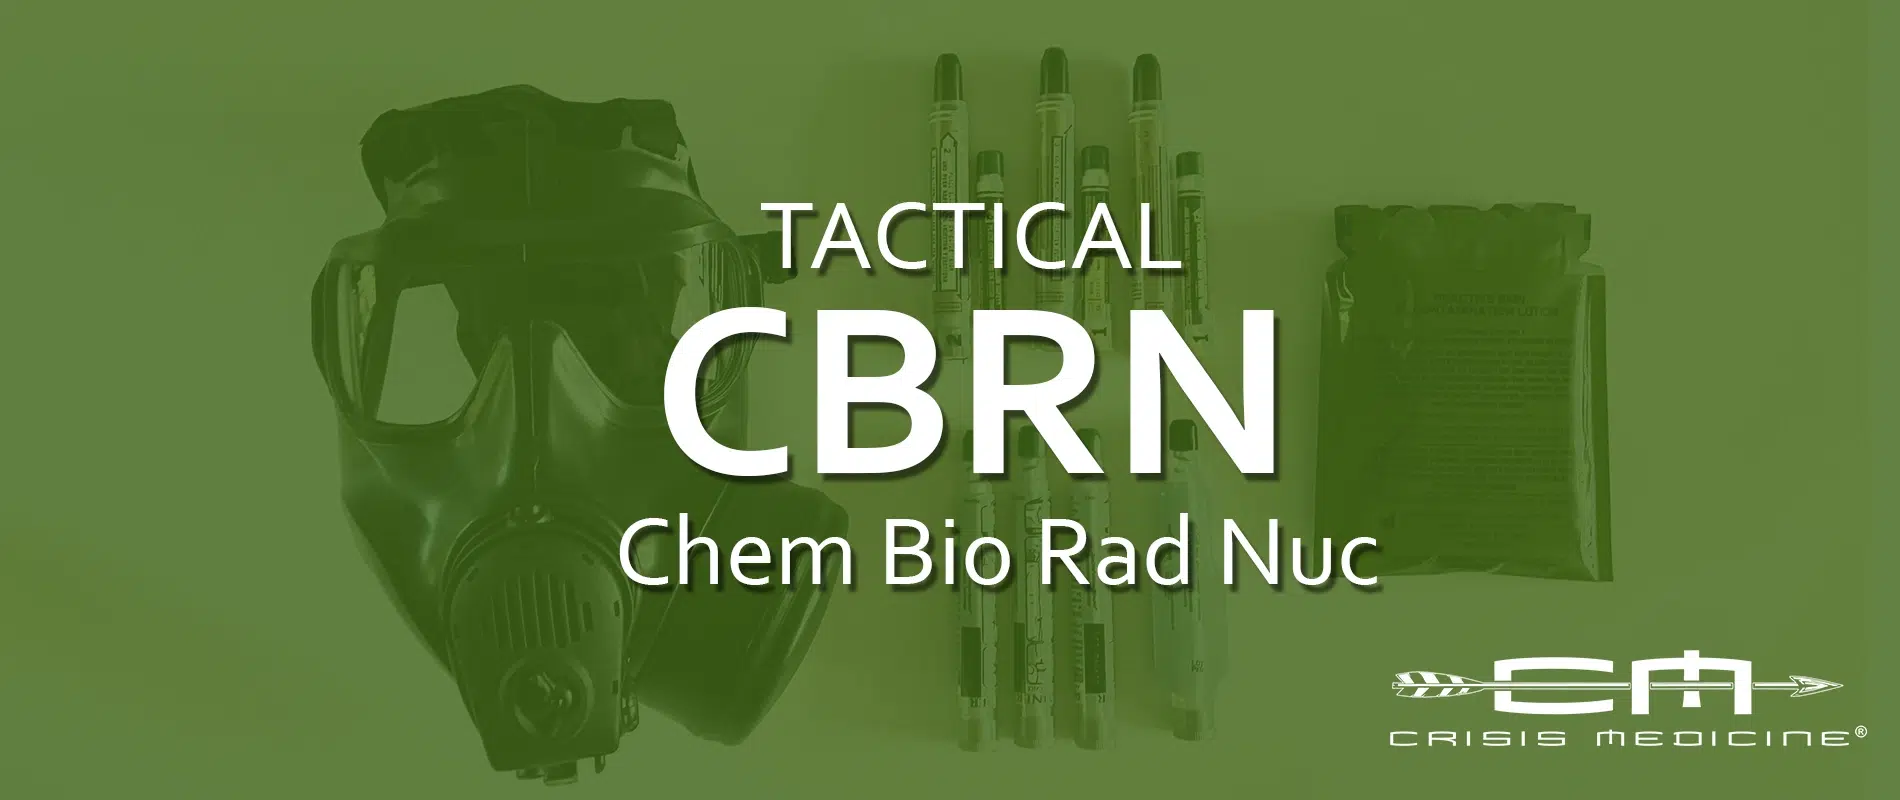 Tactical CBRN Casualty Care – ONLINE